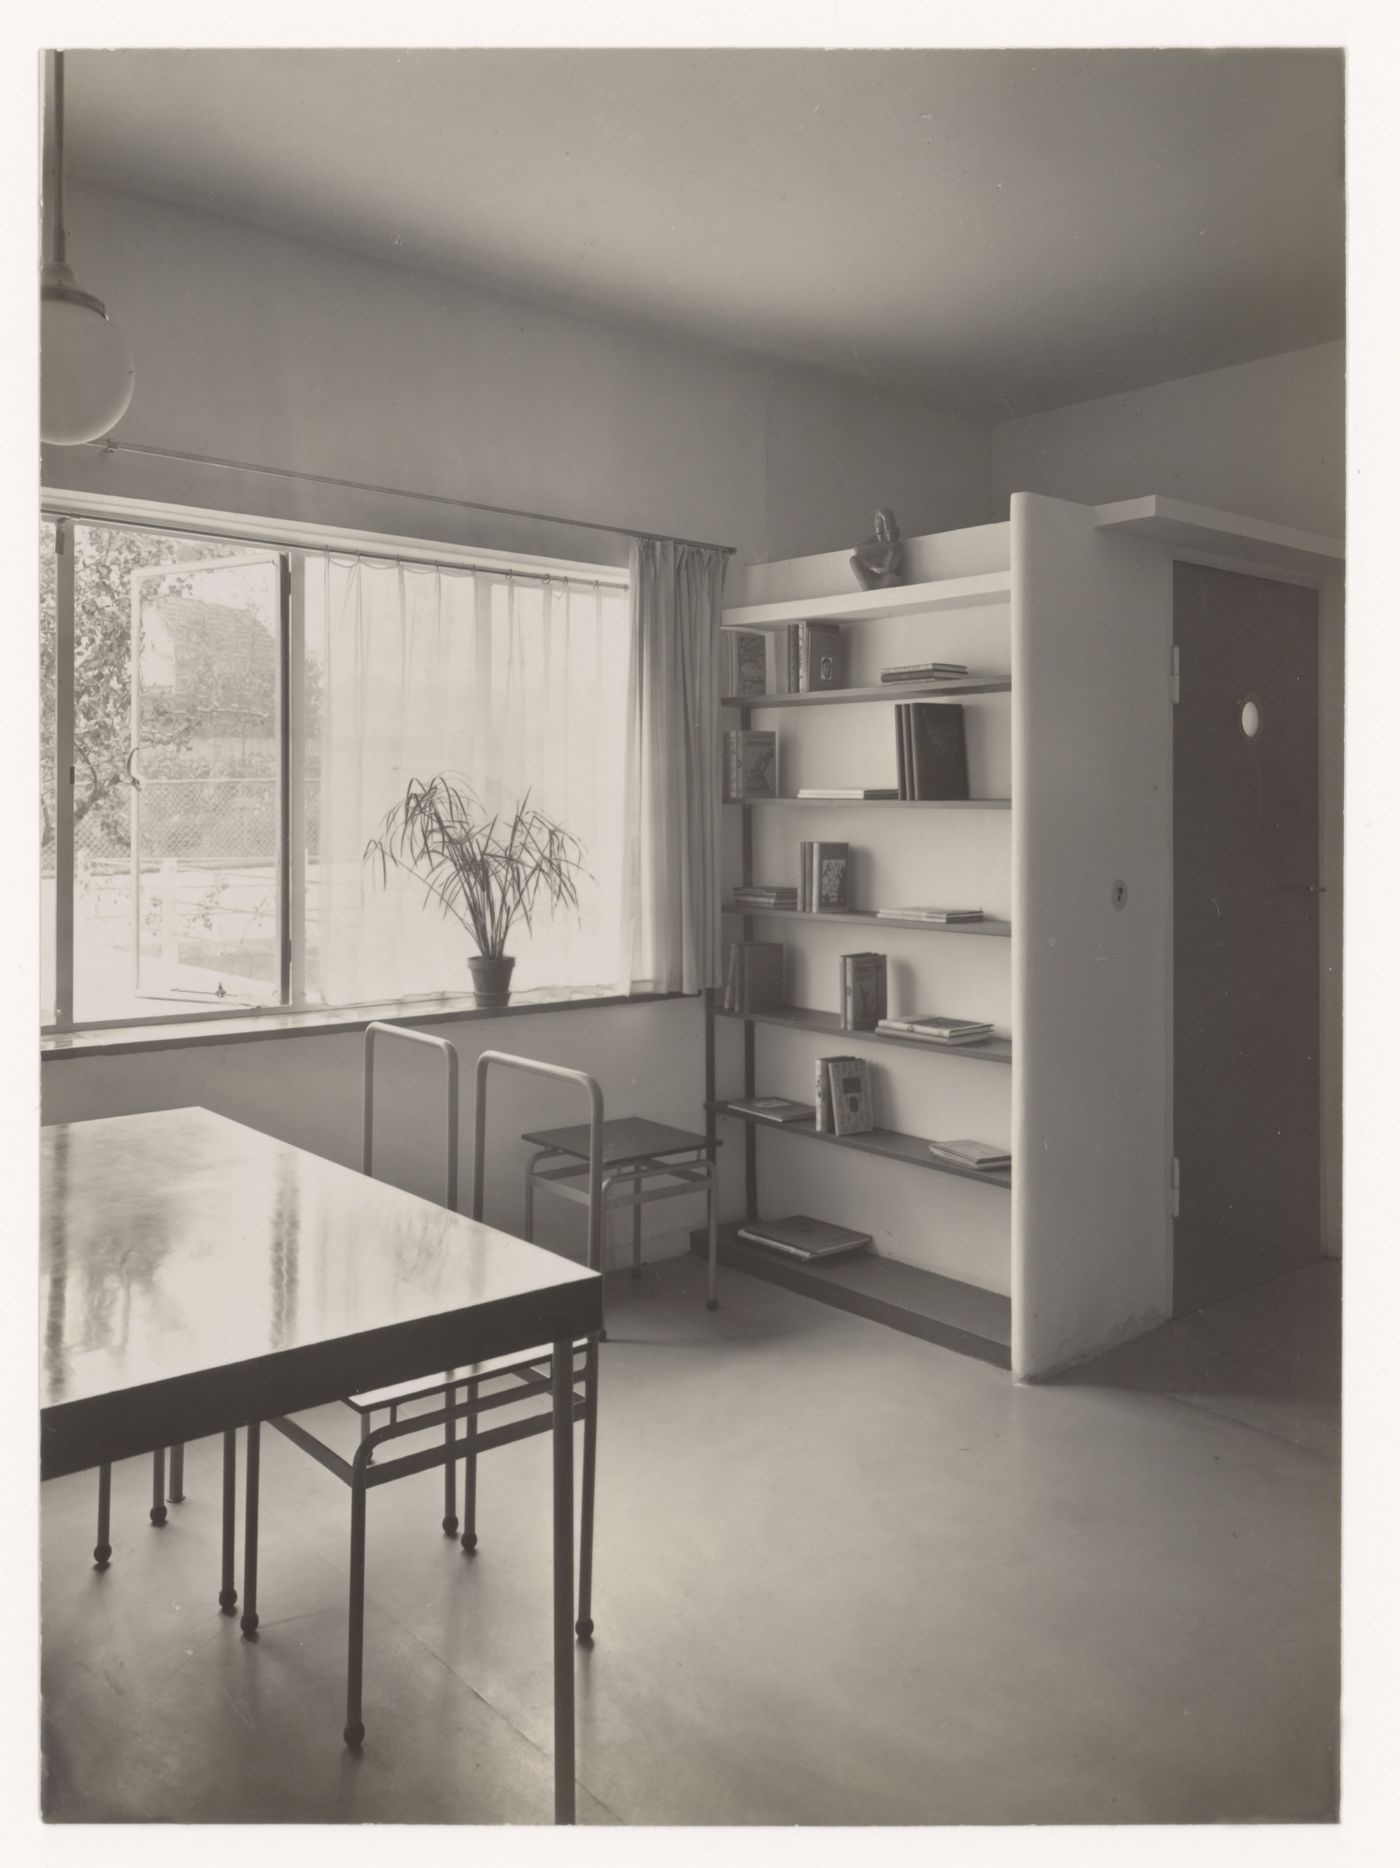 Interior view of the living room of House 8 showing a table, chairs and built-in bookshelf, Weissenhofsiedlung, Stuttgart, Germany